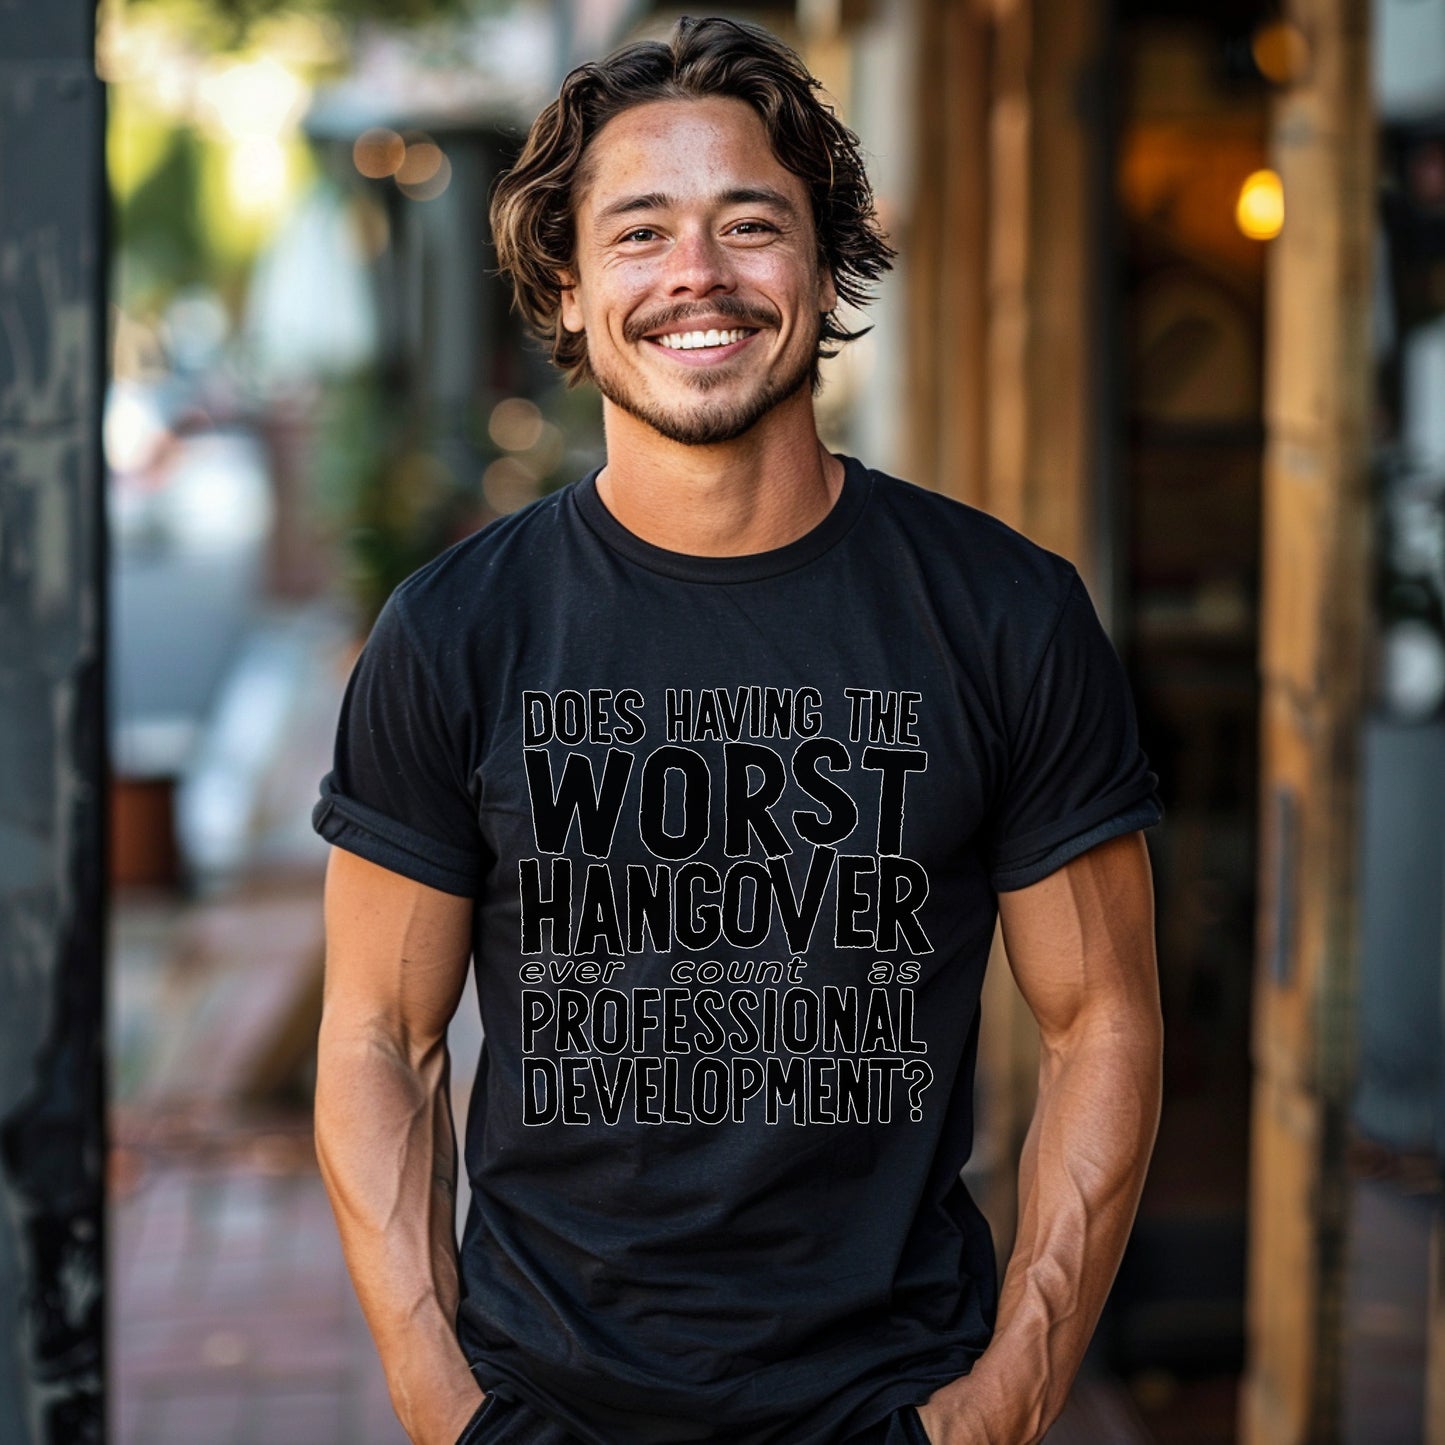 Funny Worst Hangover Ever T-Shirt , Worst Hangover Ever TShirt, Funny Worst Hangover Ever Shirt, Funny Hangover Shirt, Funny Worst Hangover